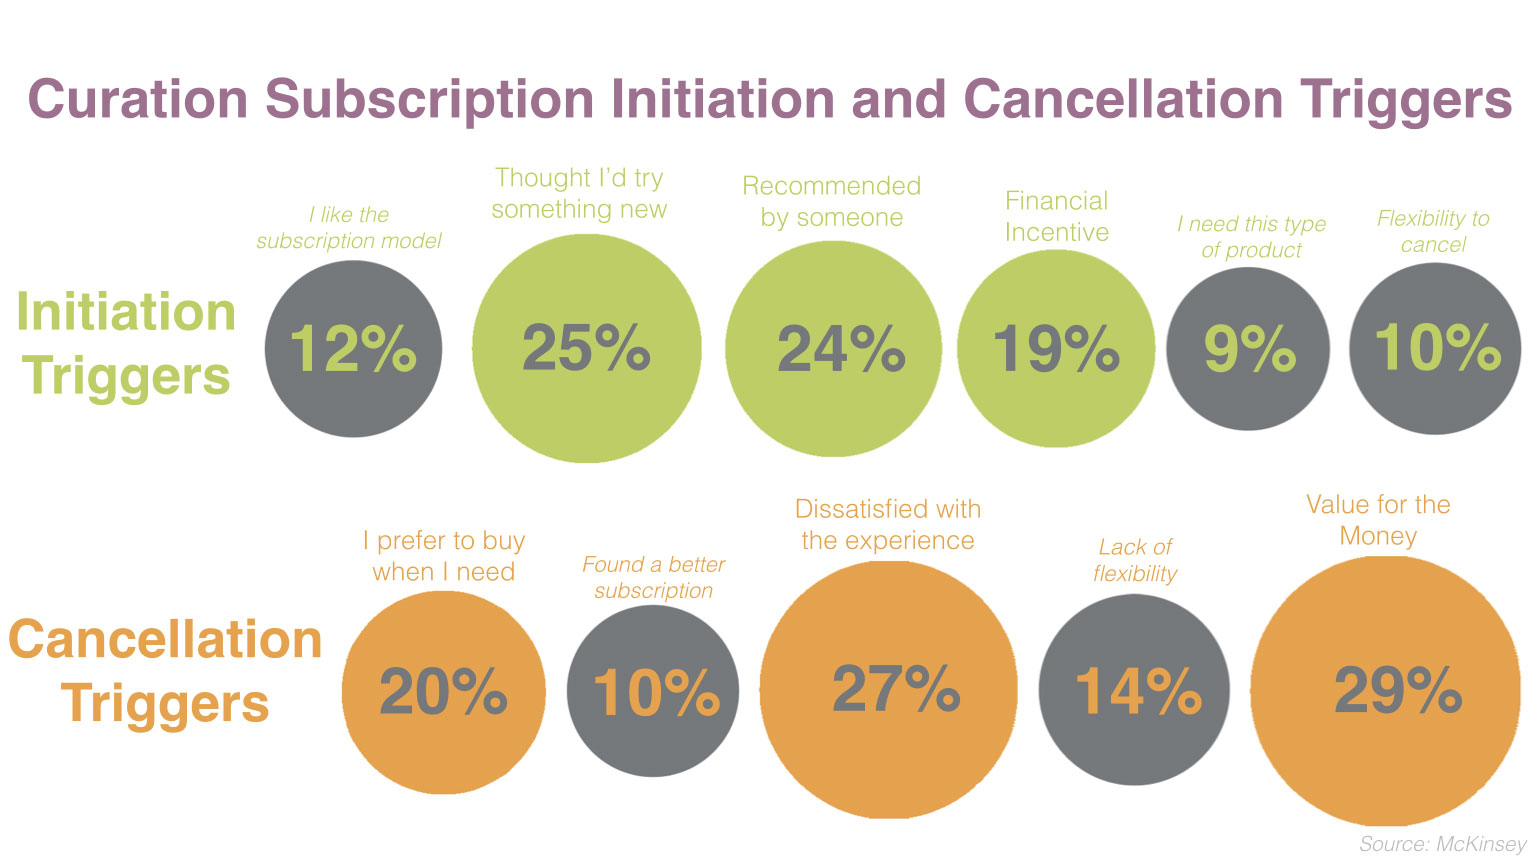 Curation subscription initiation and cancellation triggers